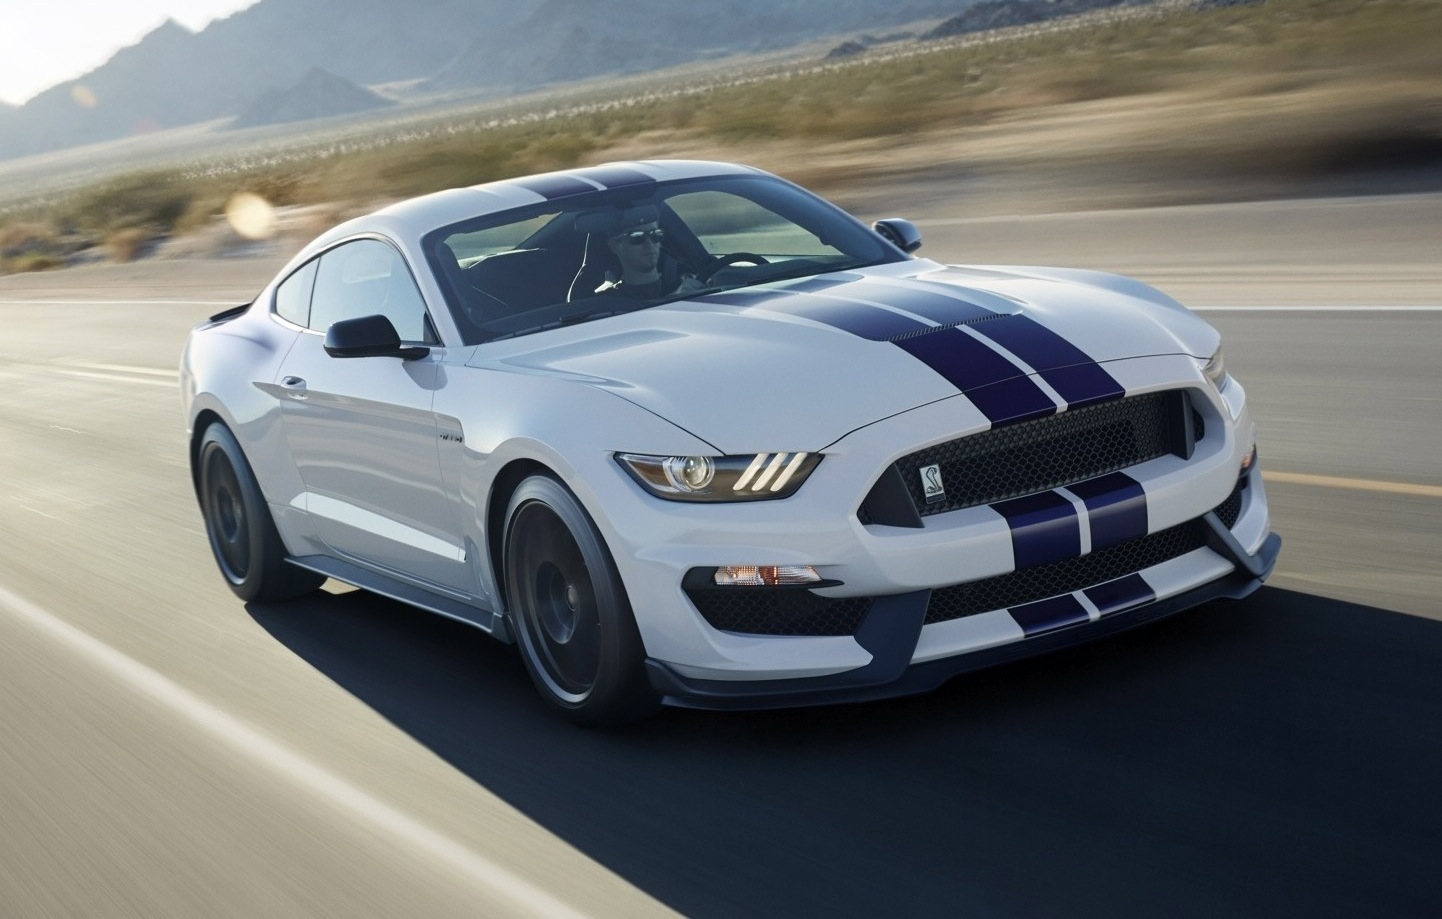 2015 Ford Shelby GT350 revealed, most powerful NA Ford